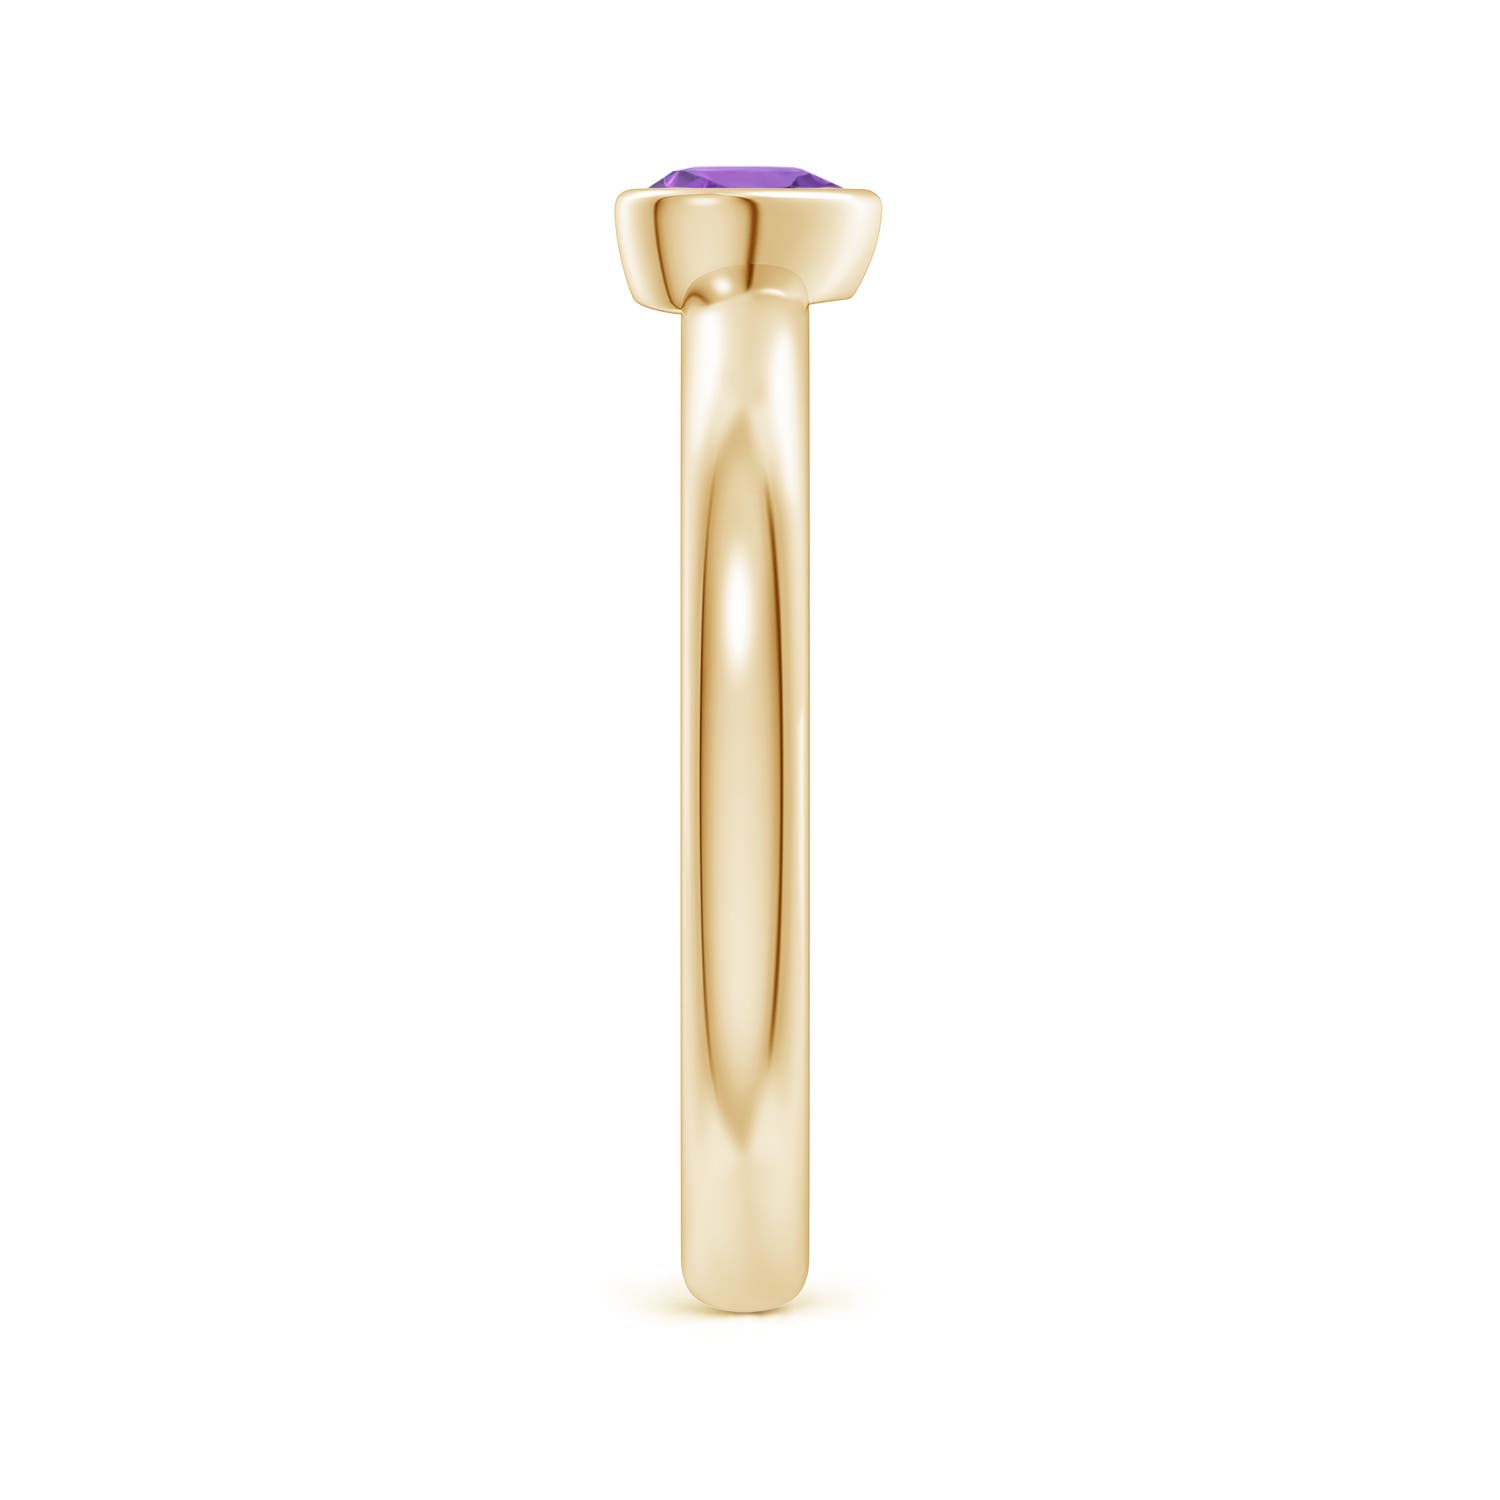 A - Amethyst / 0.2 CT / 14 KT Yellow Gold